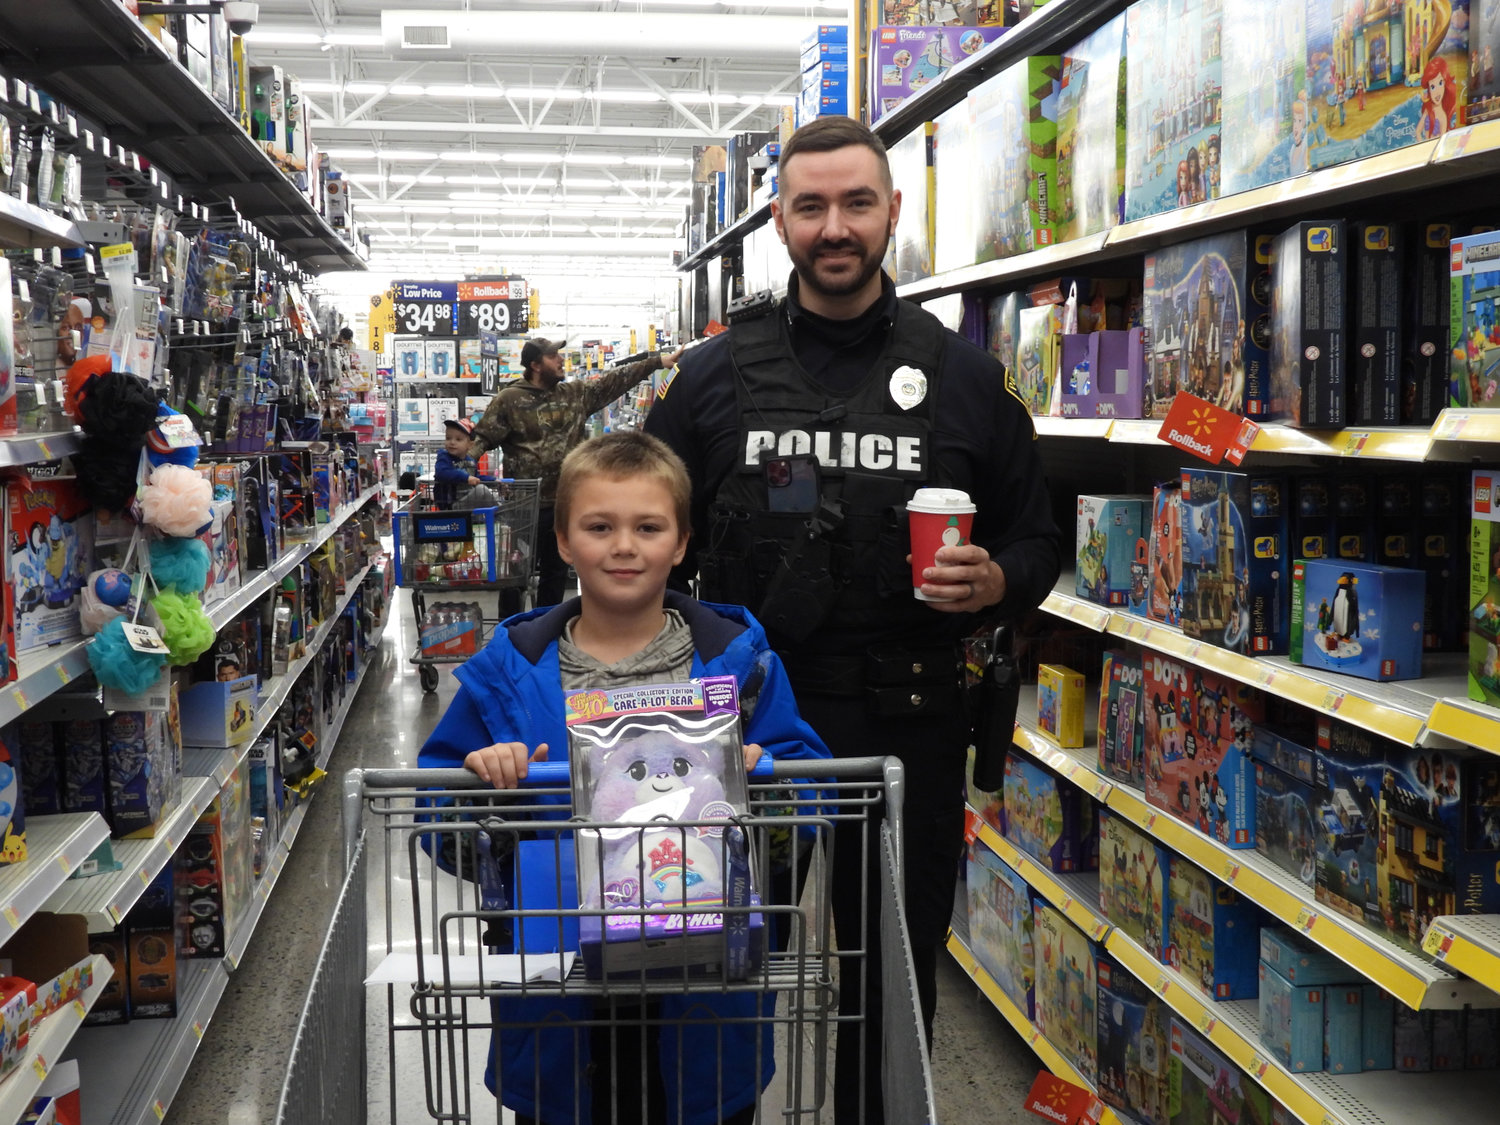 More than 80 children got a chance to shop with a cop at the Oneida Police Department's annual Shop with a Cop, where they got to meet and talk with local police officers while shopping for everything on their Christmas list. Pictured is eight-year-old Brayden Mason, shopping with Officer Tyler Witchley.